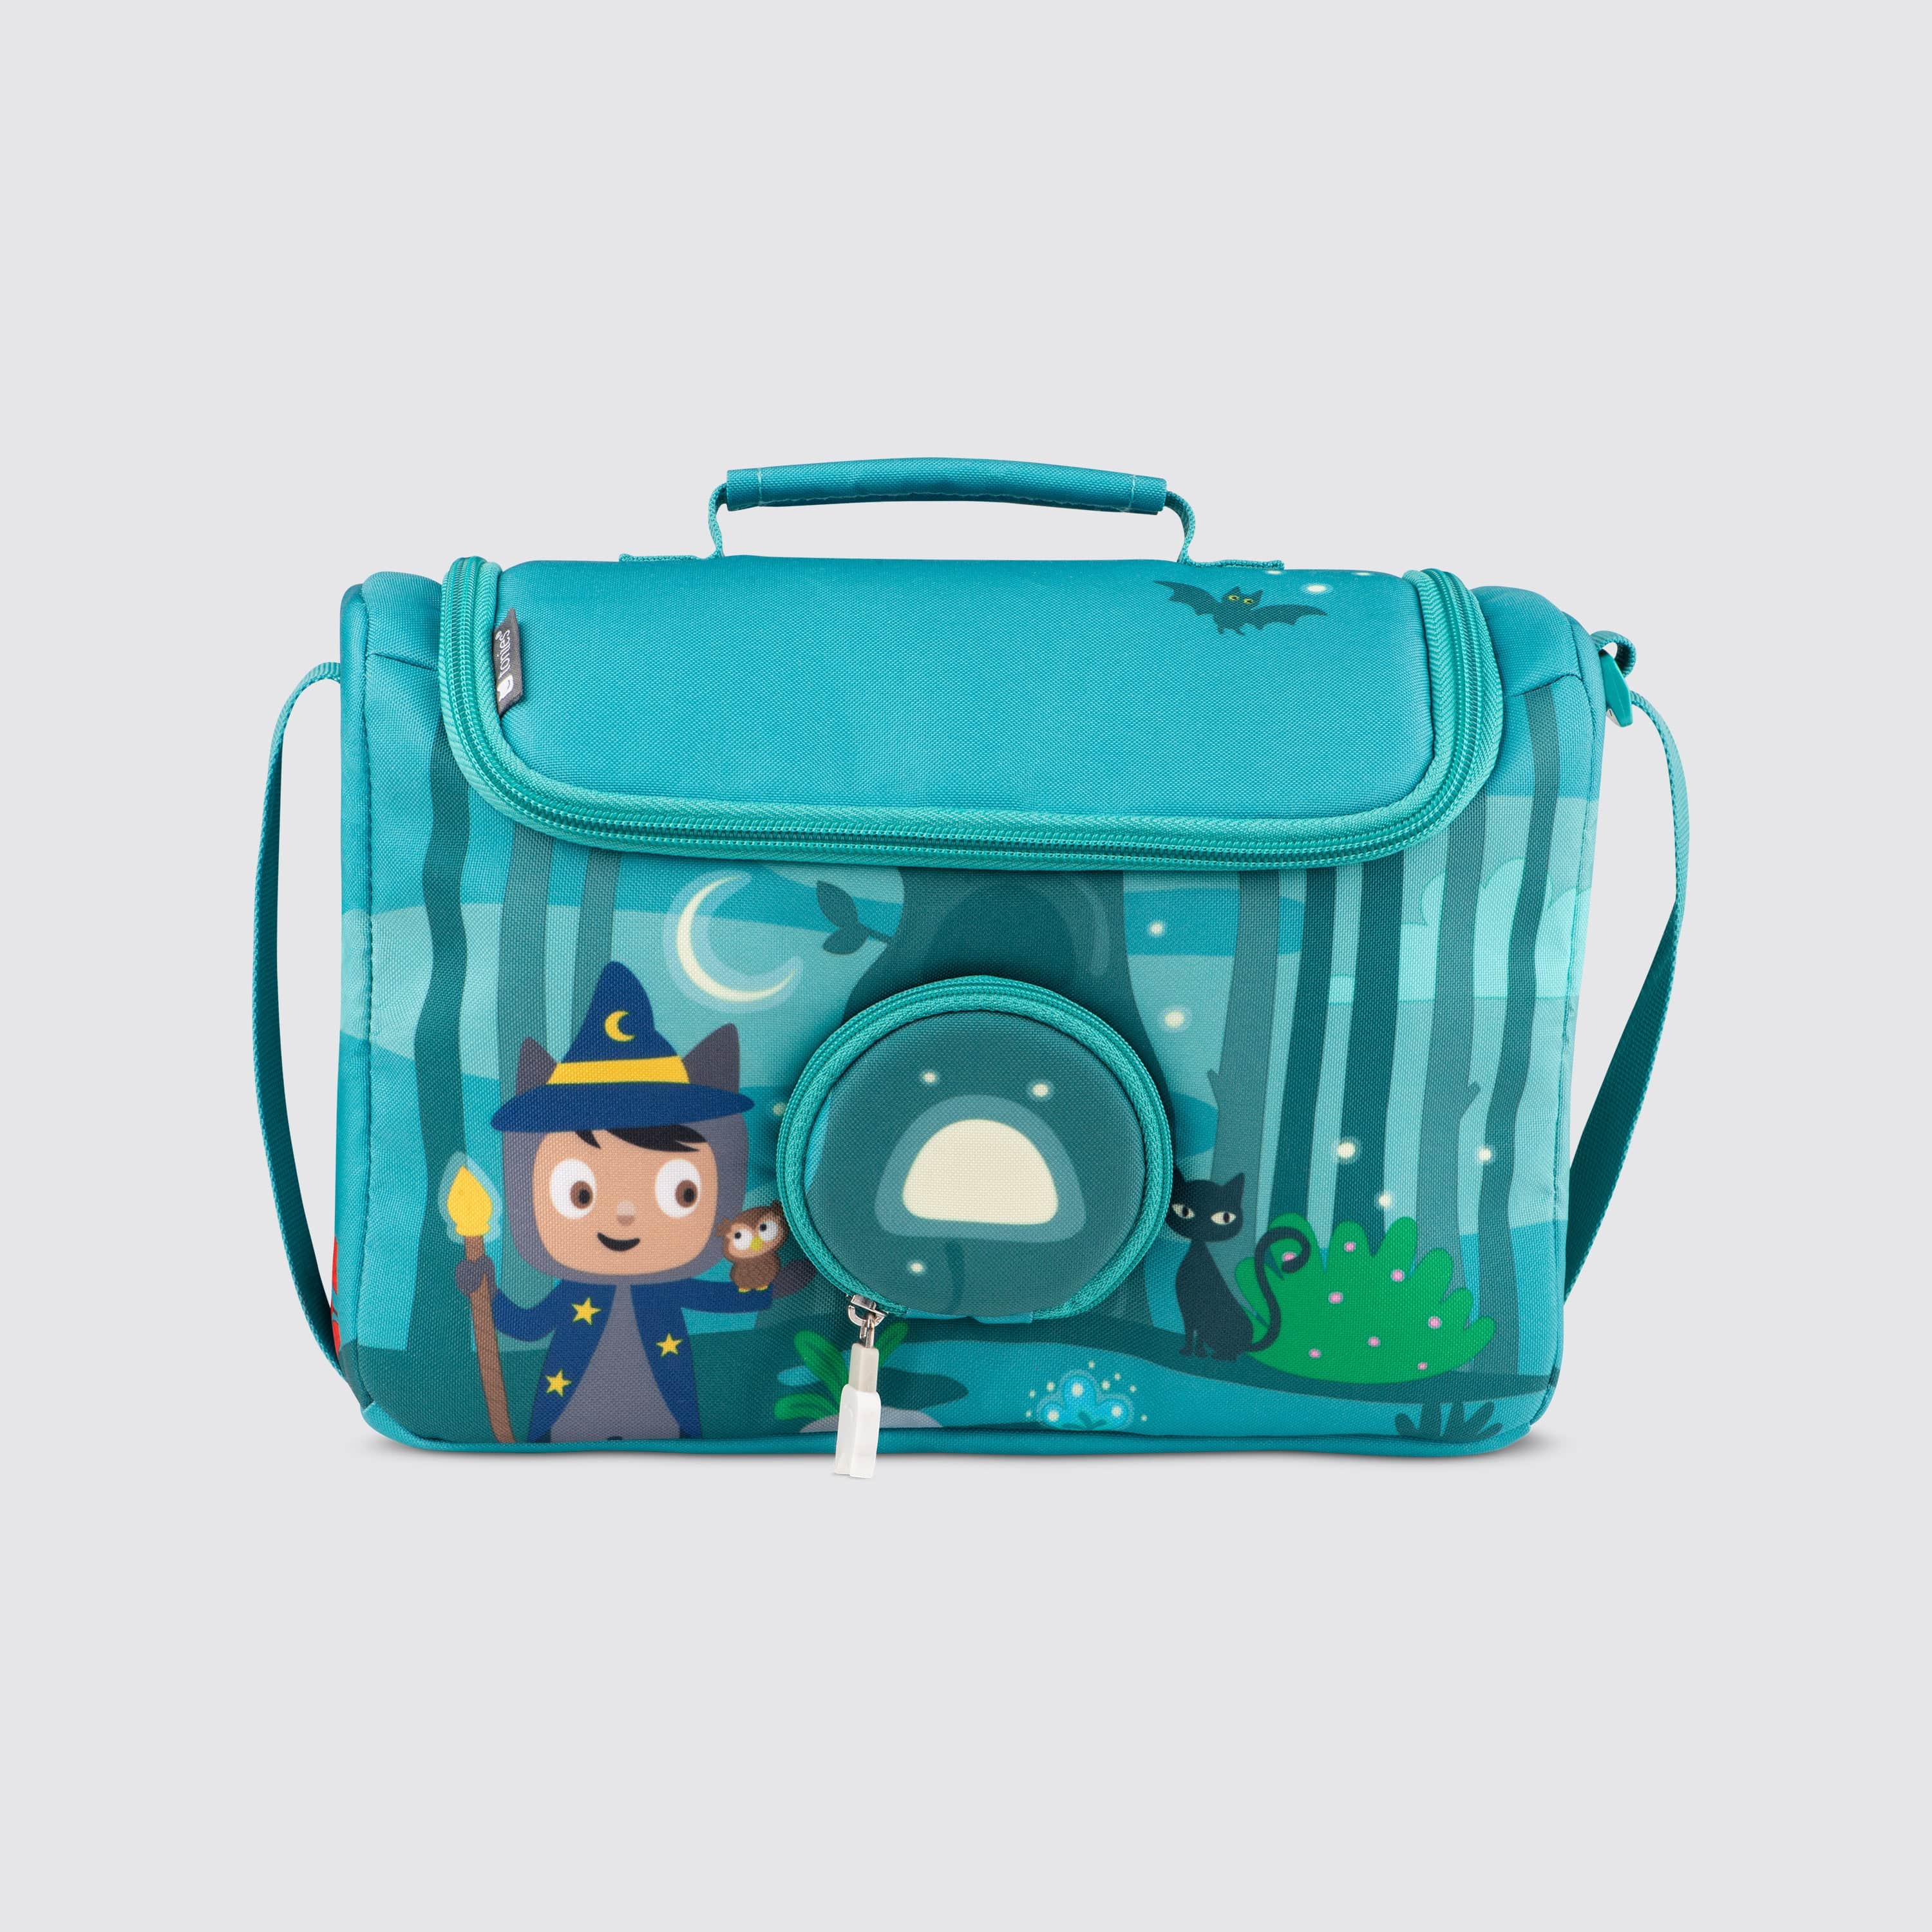 tonies® I Listen & Play Bag - Enchanted Forest I Buy now